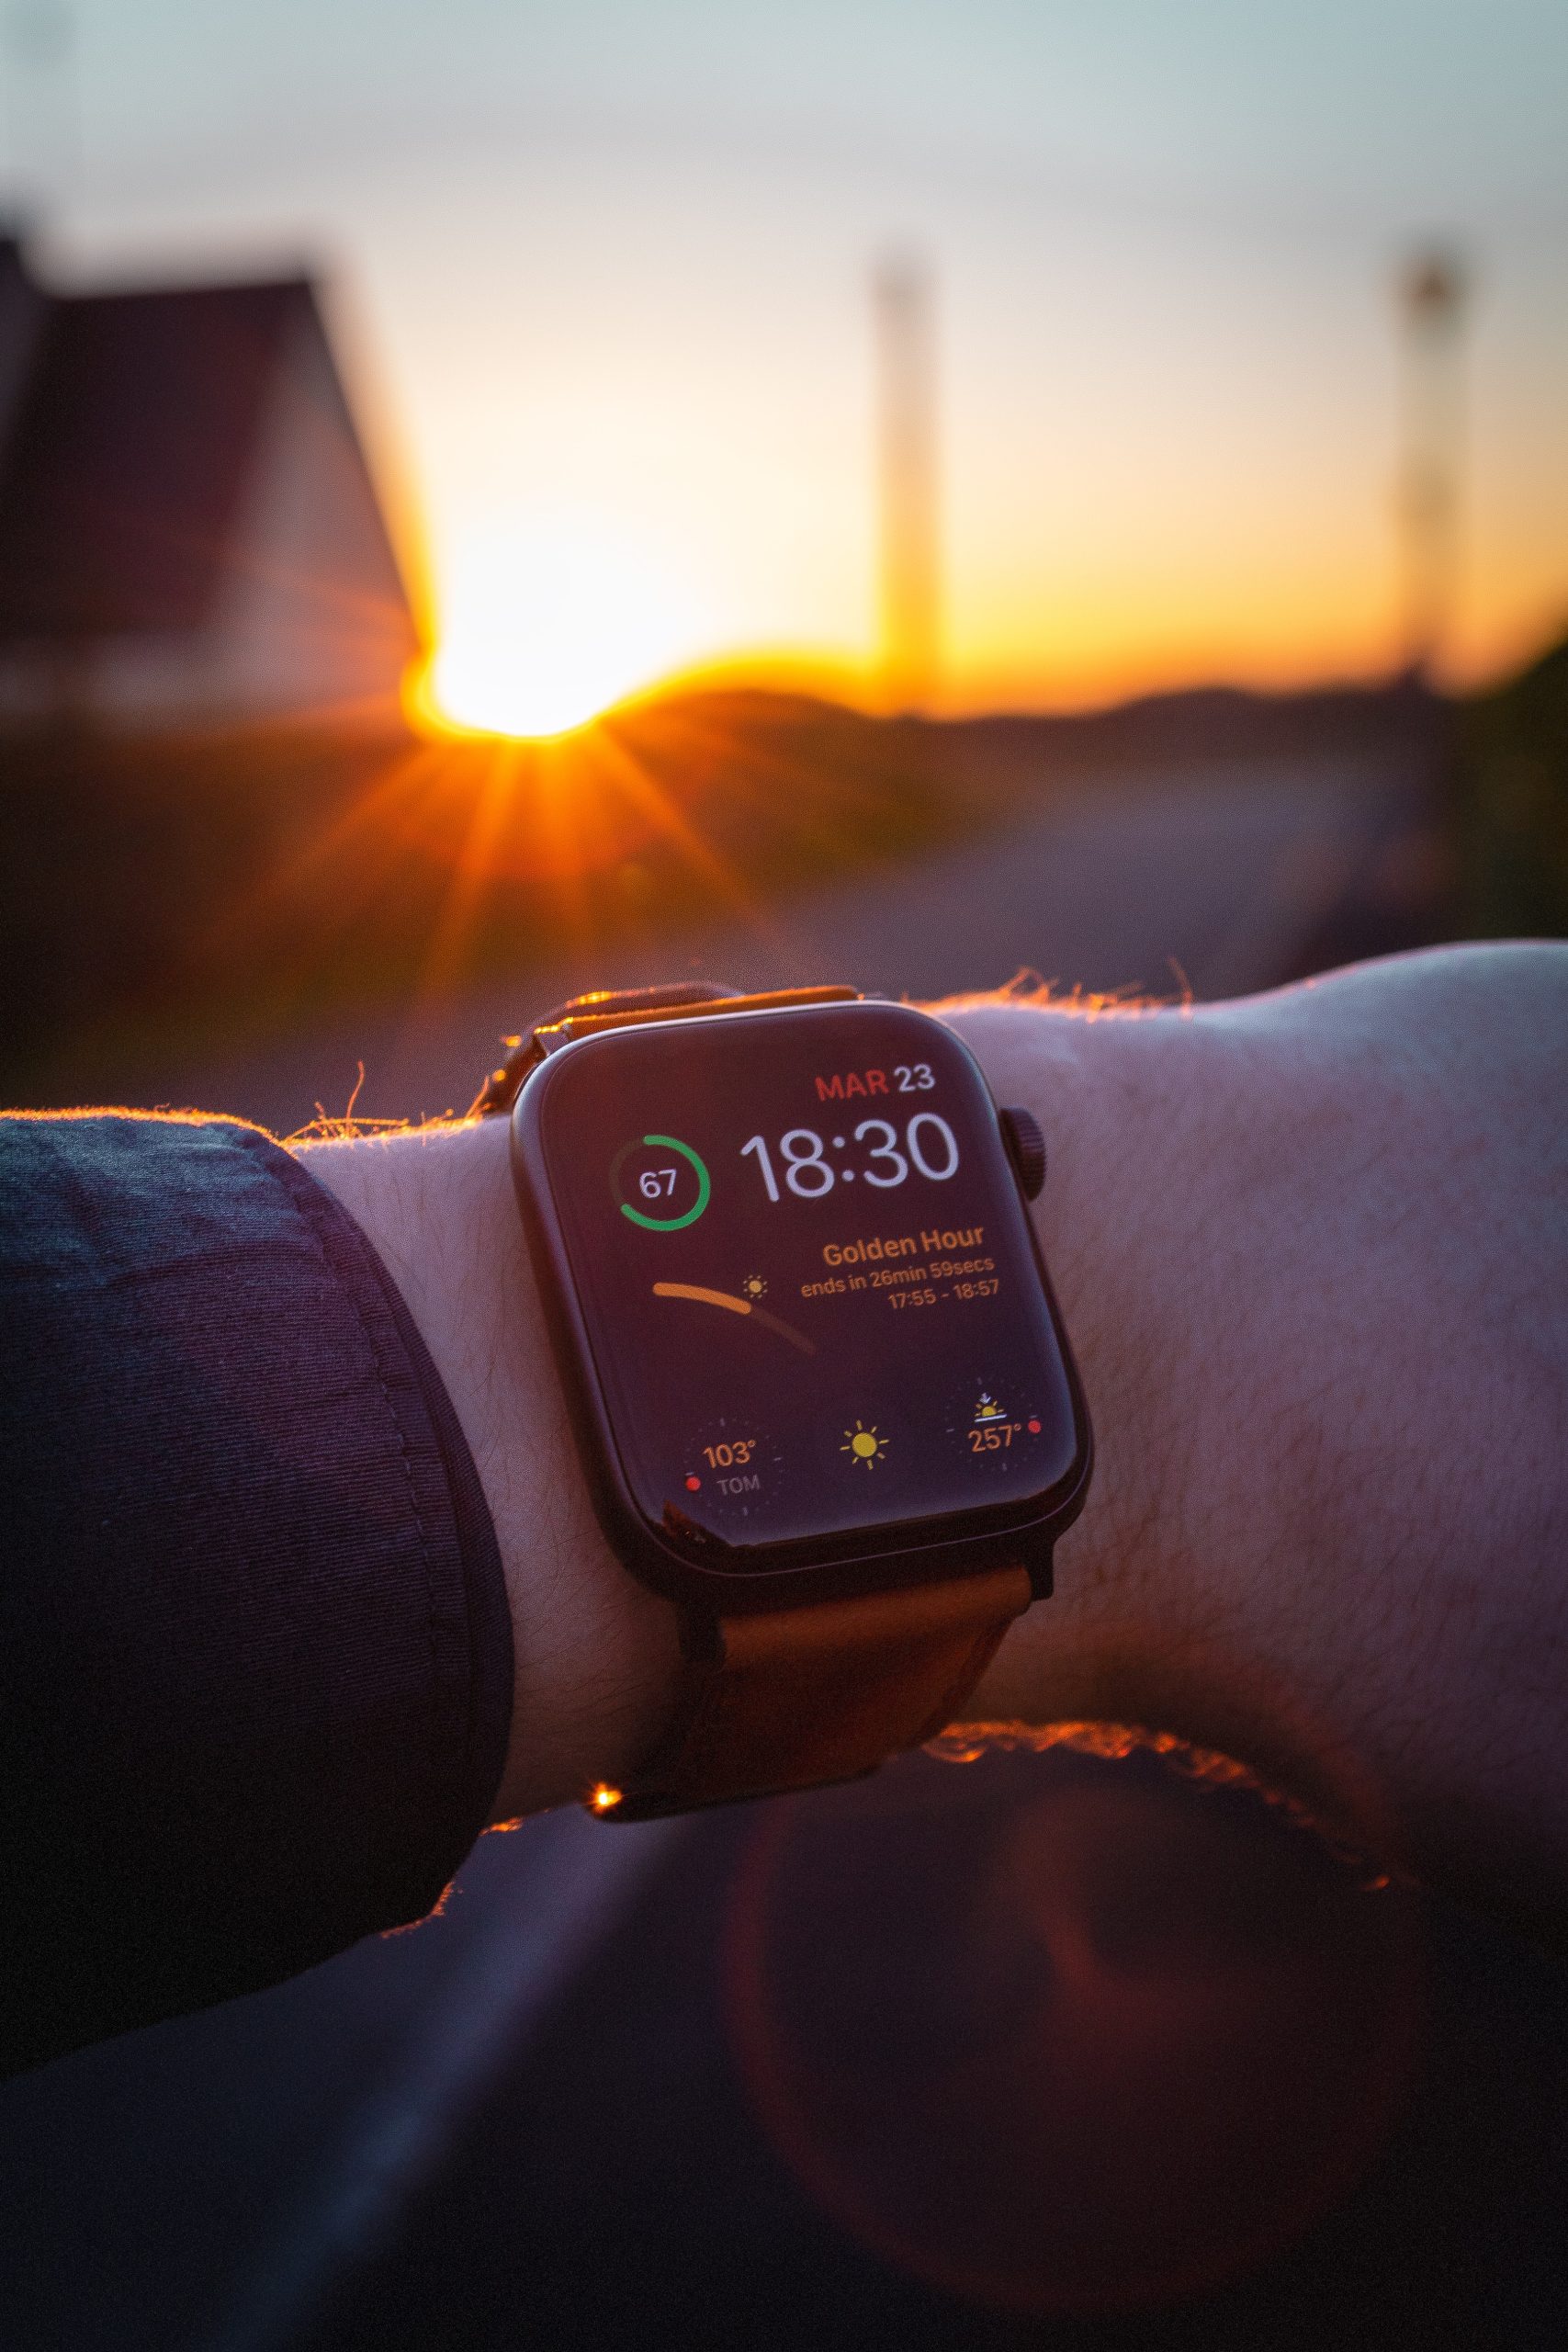 How to connect Apple Watch to Android without an iPhone